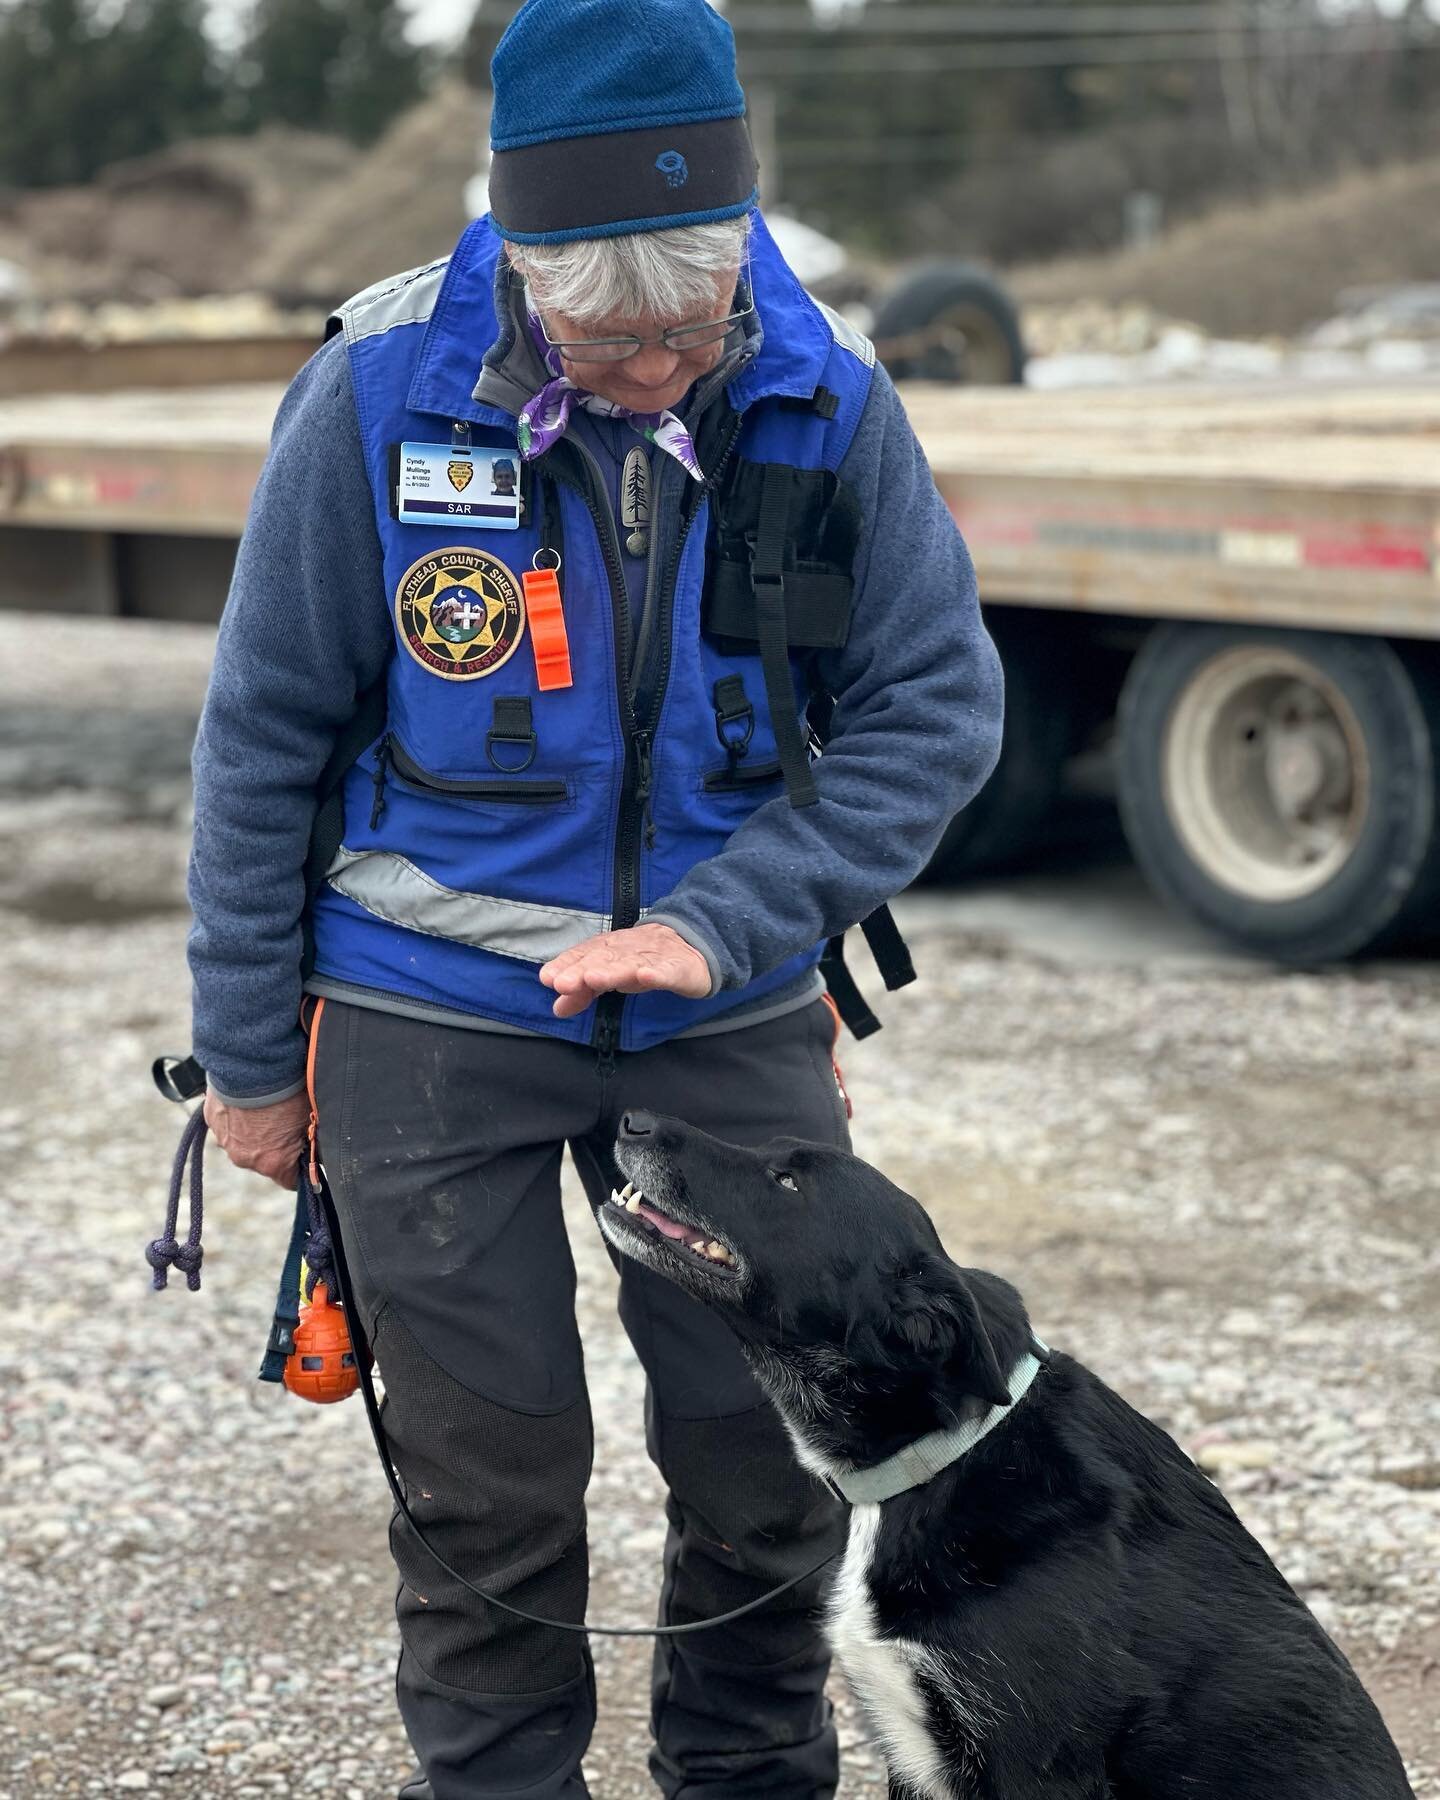 How do you spend your weekends? These folks and their K9s put in so much of their time and resources training and working. Head on over to https://flatheadk9.org/giving/ and show your support 🐕